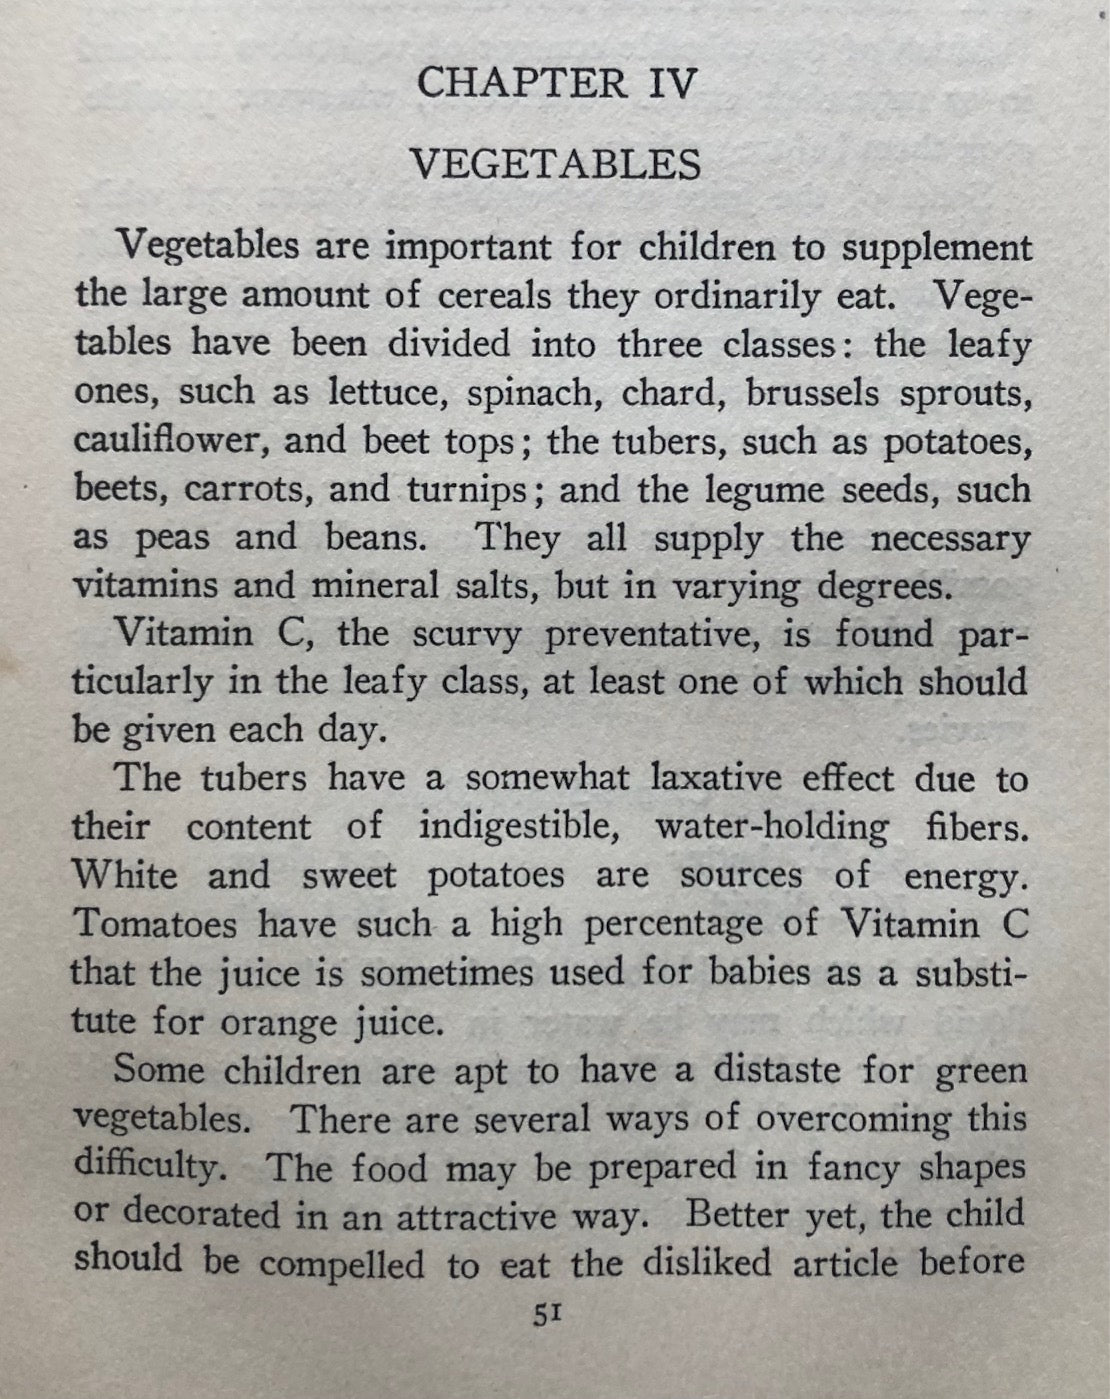 (Children's) Barbara Webb Bourjaily & Dorothy May Gorman. The Mother's Cook Book: How to Prepare Food for Children. Intro. on child feeding and health by Justin Garvin, M.D.